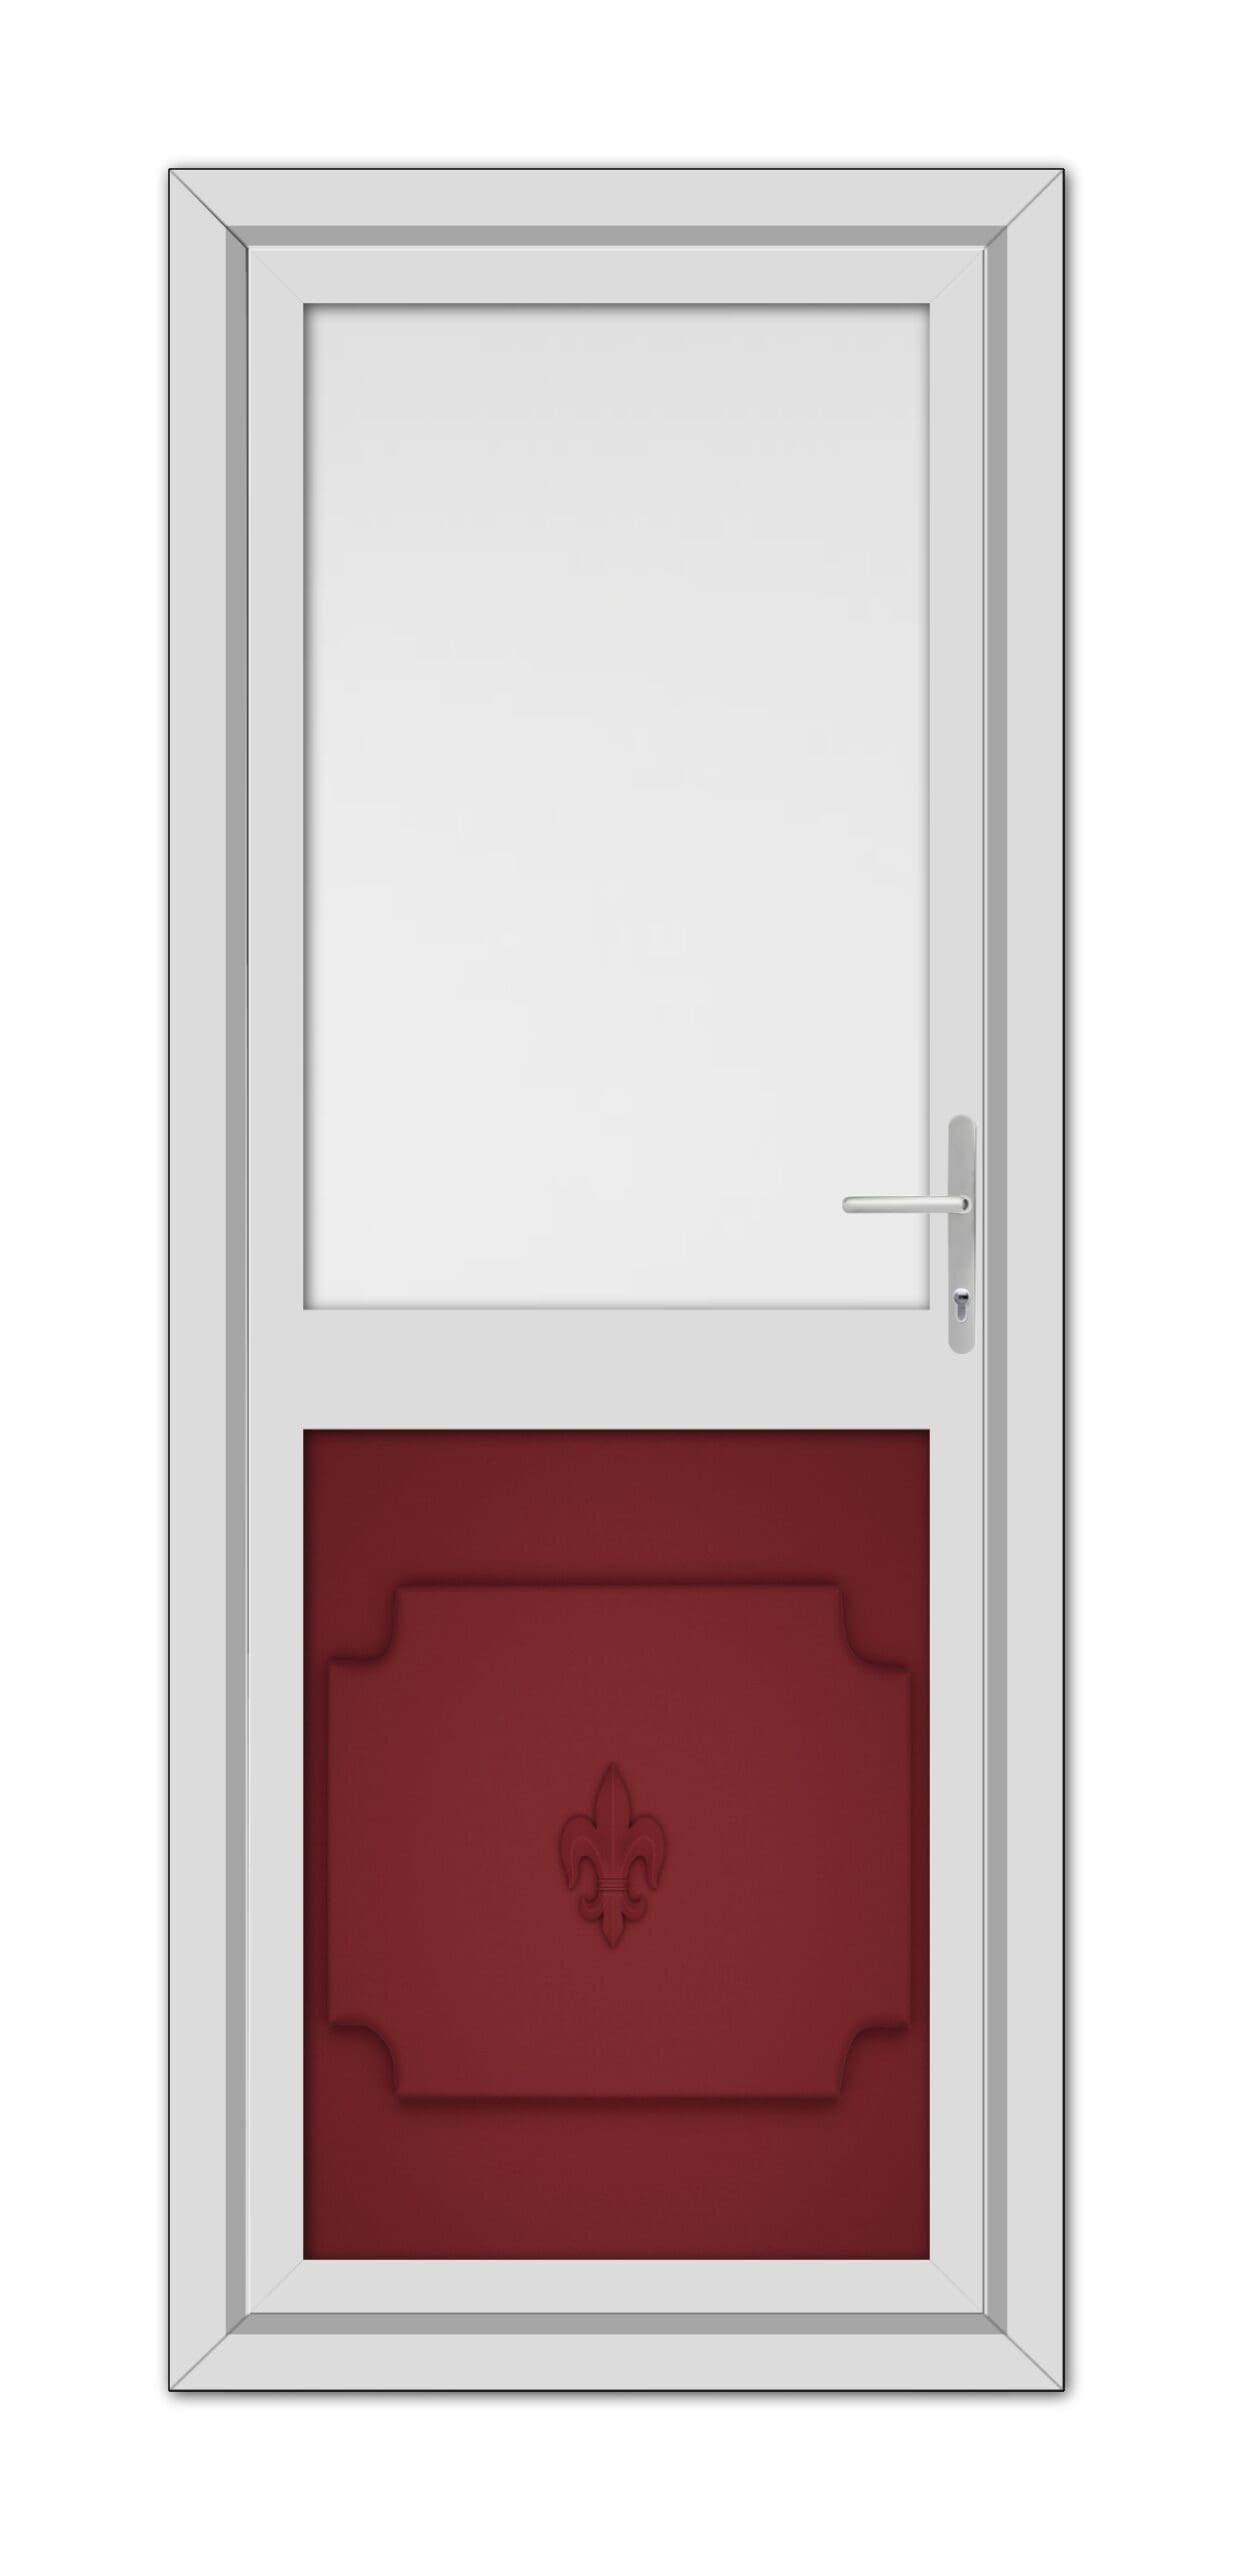 White door with a square glass panel on top and a Red Abbey Half uPVC Back Door with a fleur-de-lis design on the bottom.